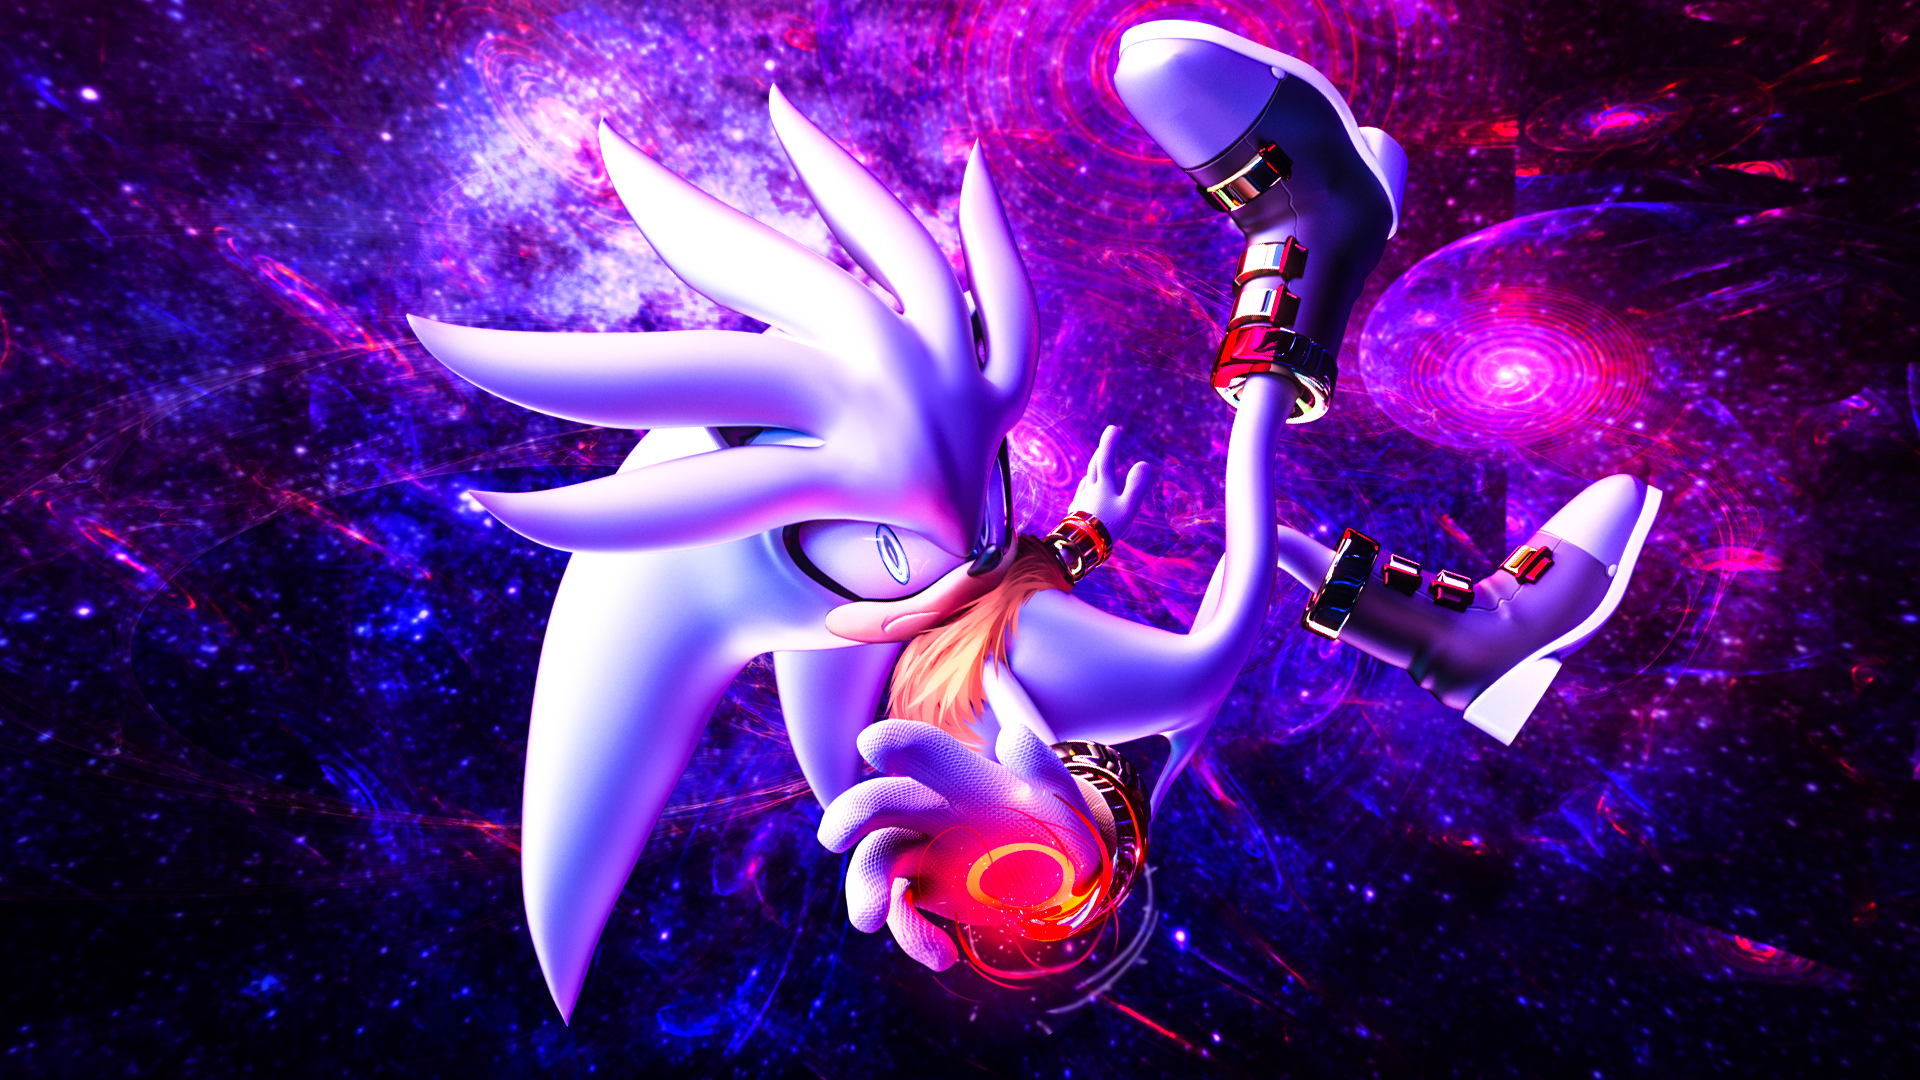 Silver the Hedgehog by Light-Rock